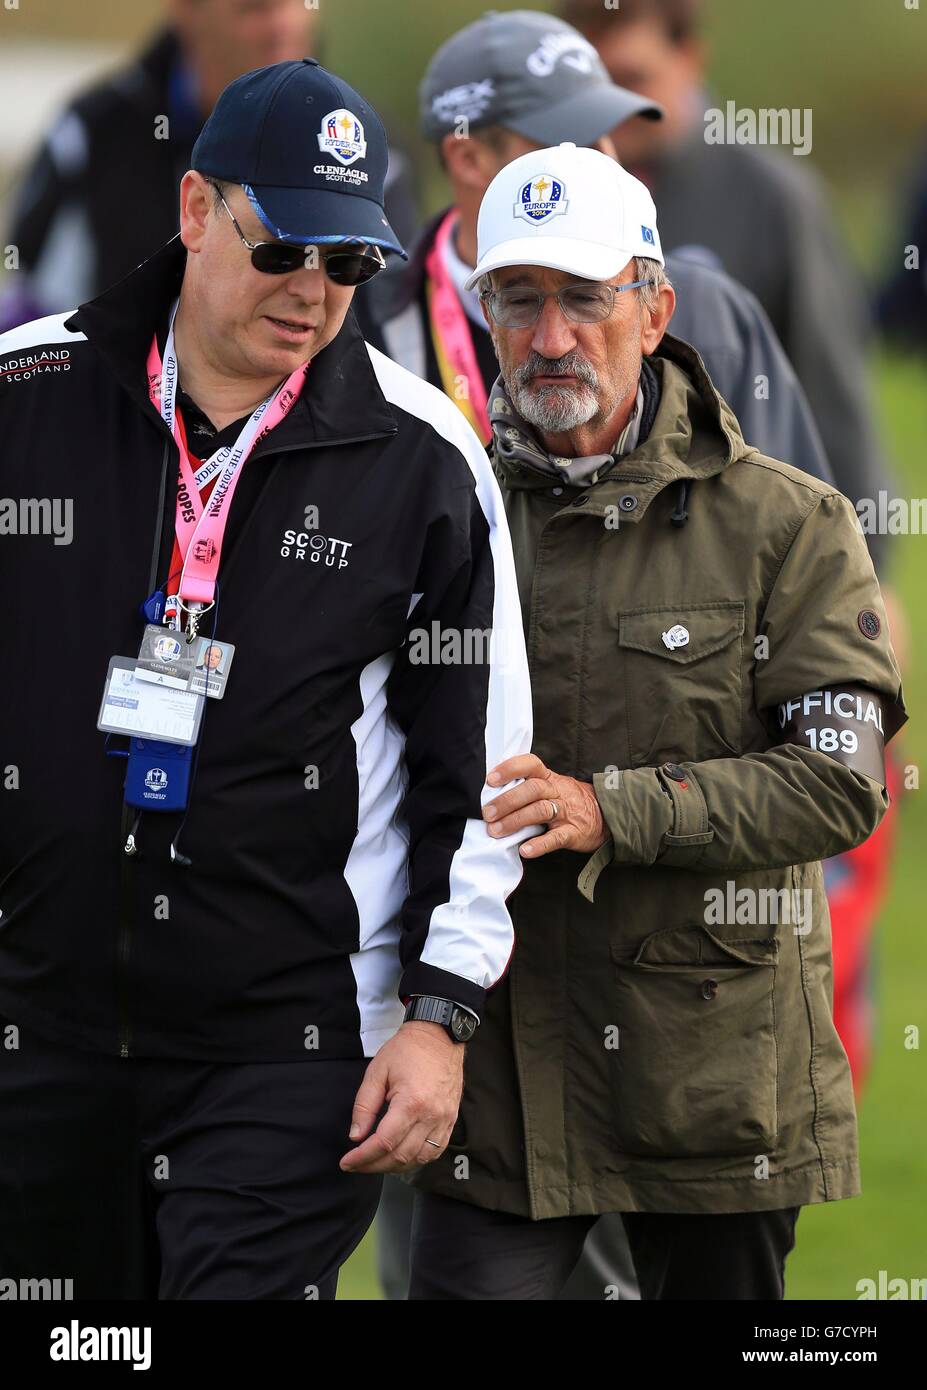 Albert II, Prince of Monaco and Eddie Jordan during the Foursomes matches on day two of the 40th Ryder Cup at Gleneagles Golf Course, Perthshire. Stock Photo